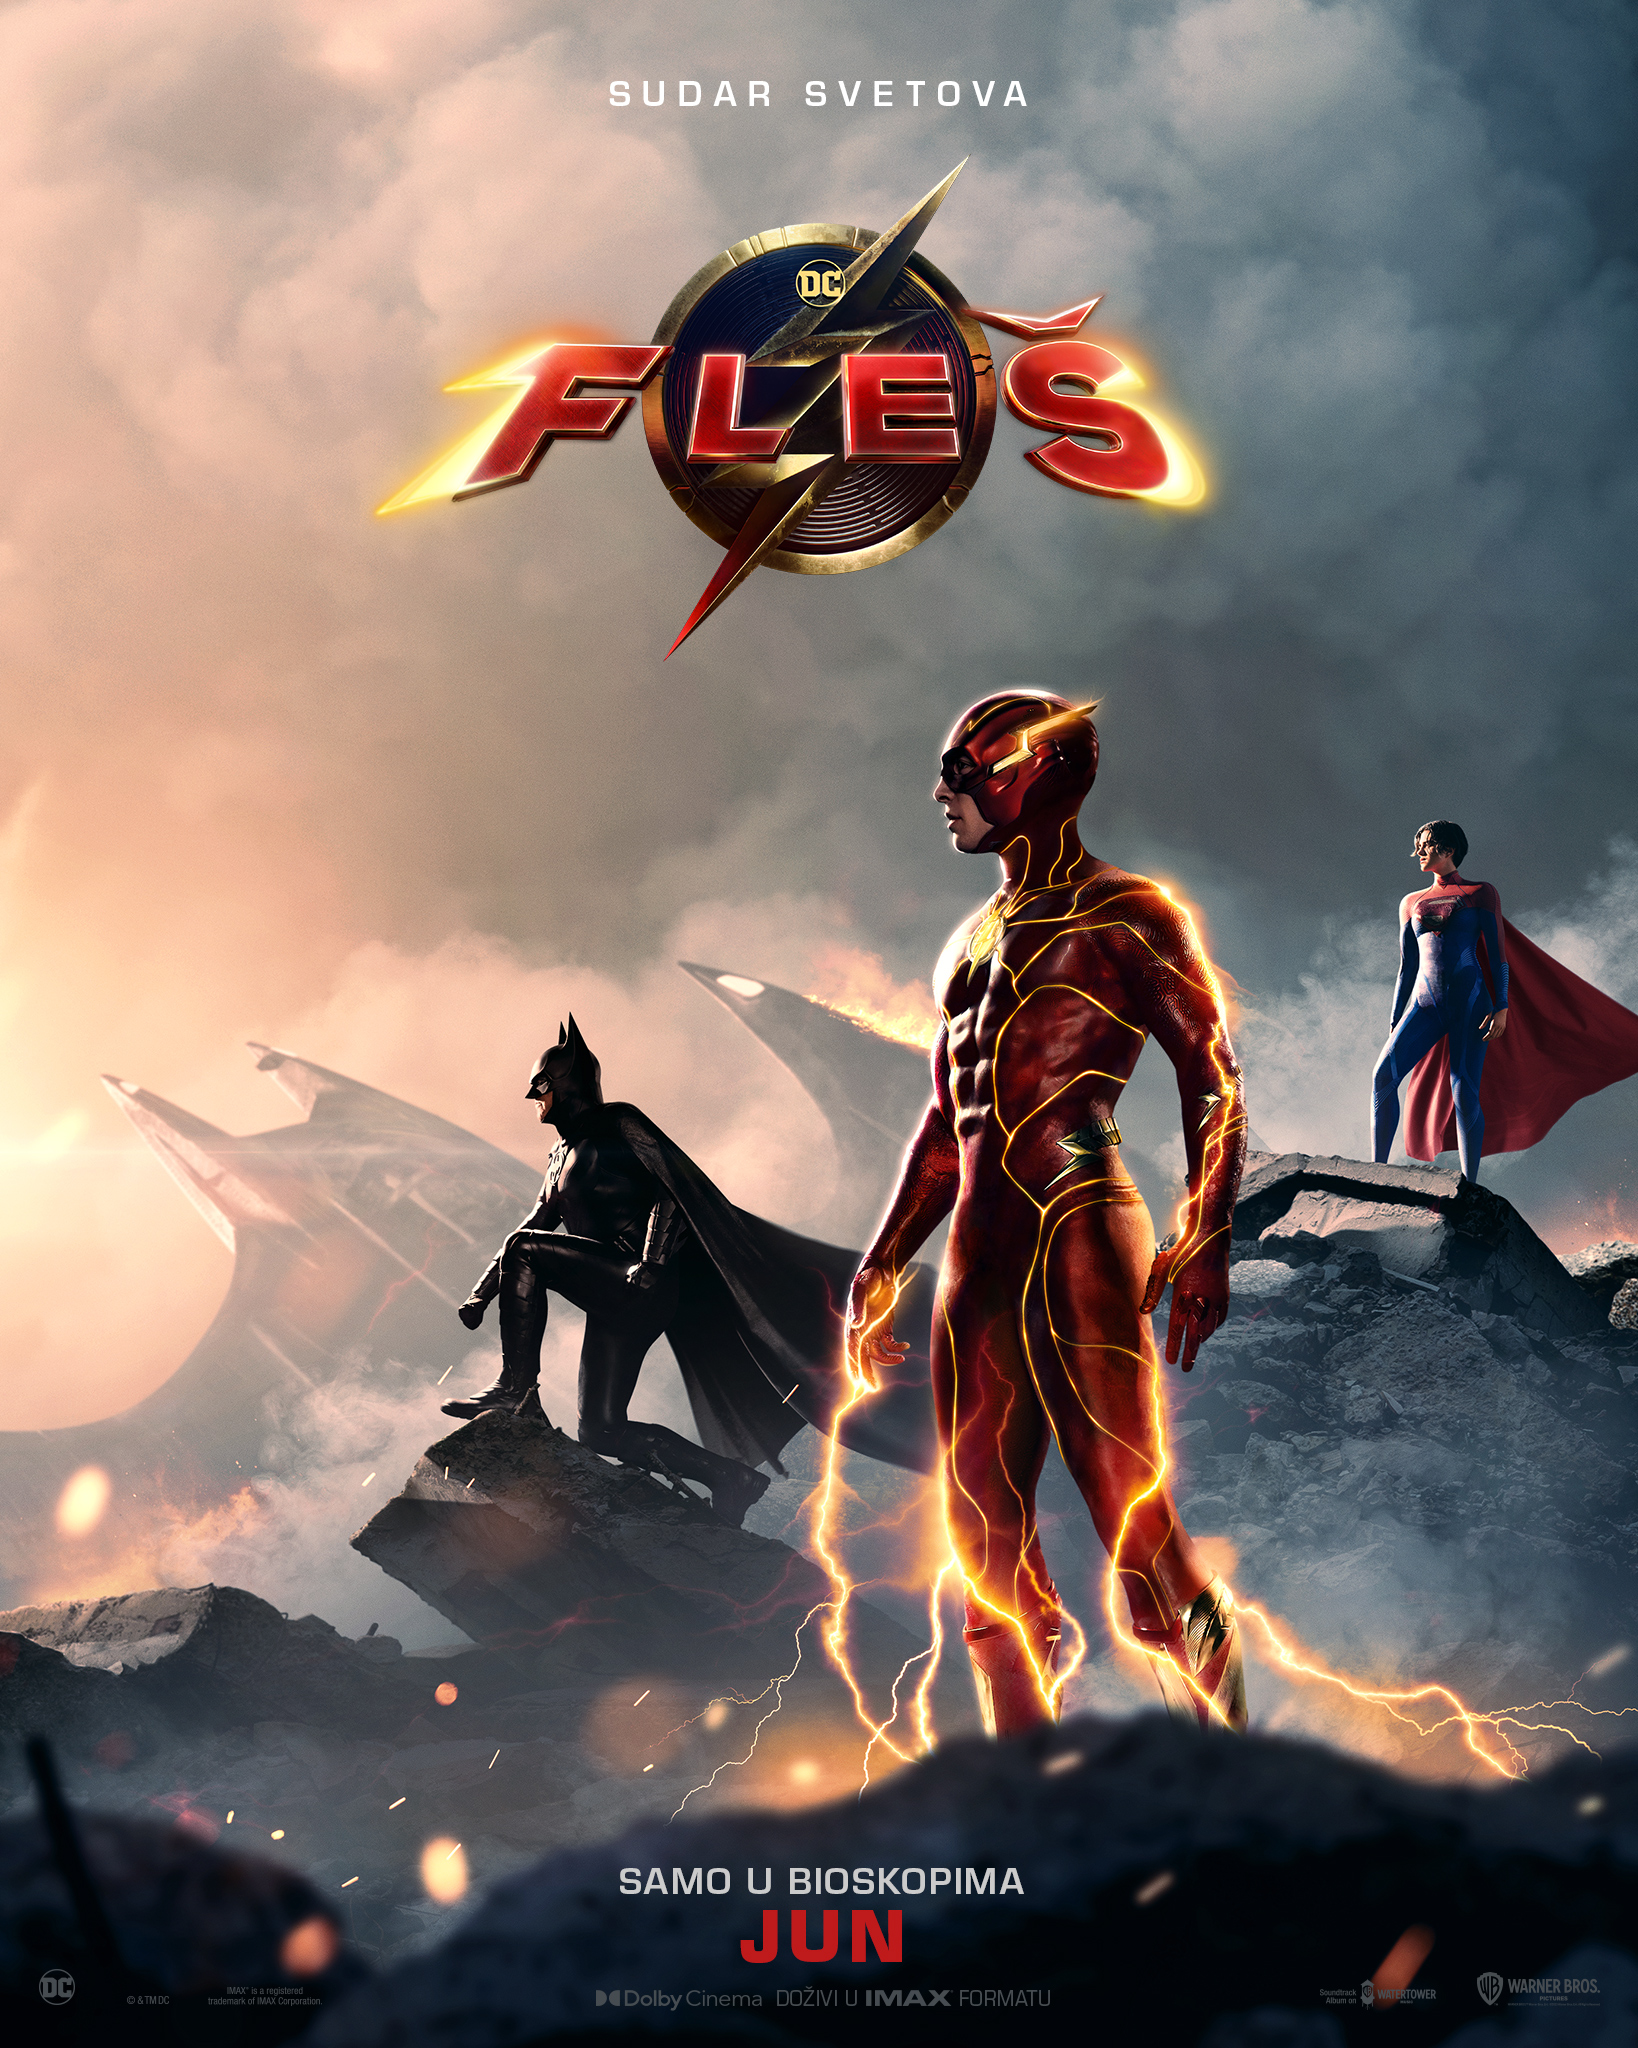 THE FLASH poster